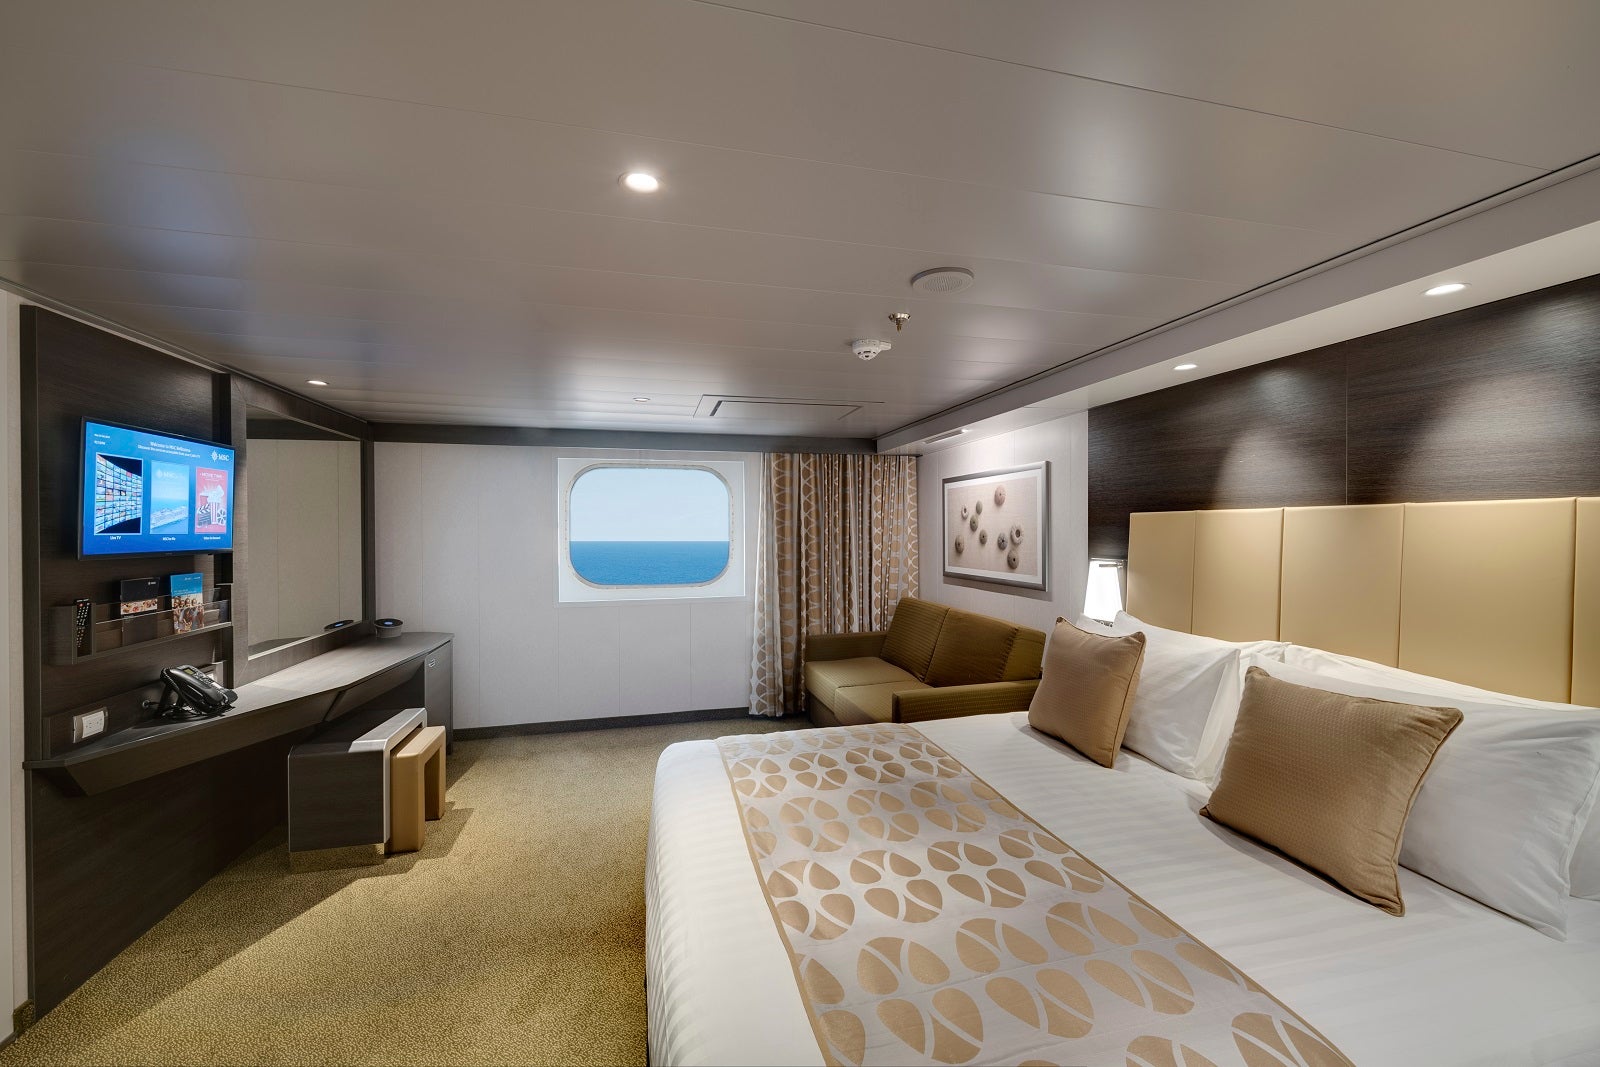 A cruise ship cabin with a bed, sofa, desk, TV and window